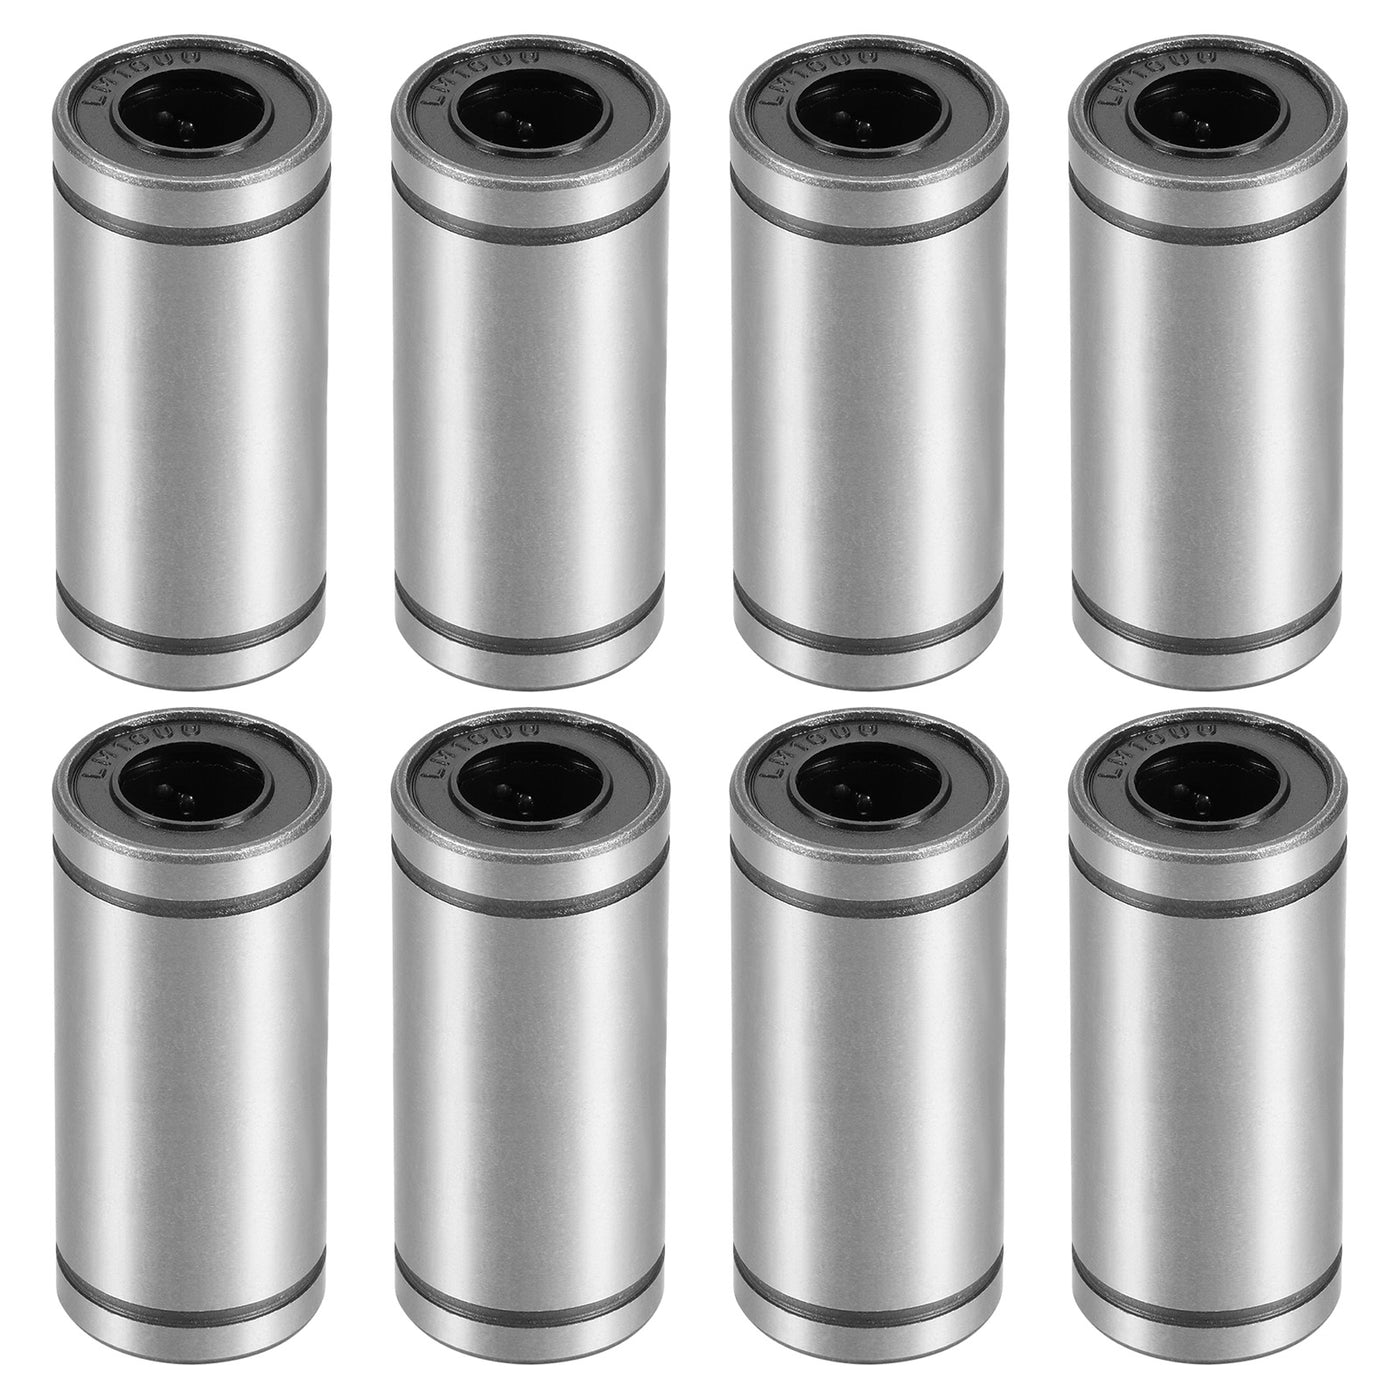 uxcell Uxcell 8pcs LM10LUU Linear Ball Bearings, 10mm Bore 19mm OD 55mm Long Linear Bearing for CNC, 3D Printer